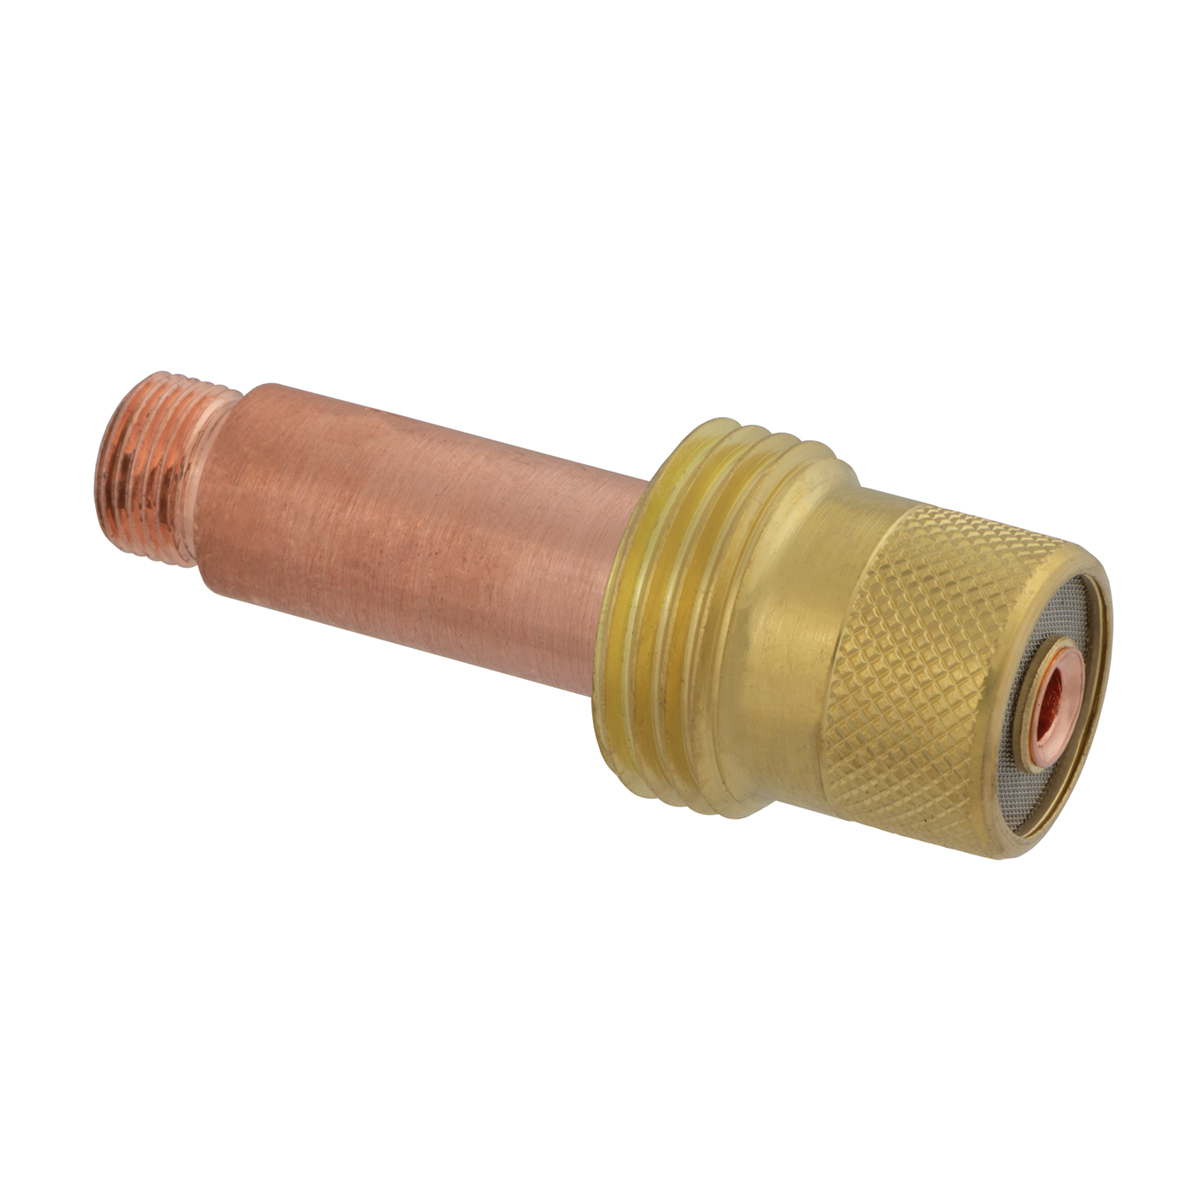 2.4MM TIG Welding Torch Stubby Gas Lens Anti-Oxidation Tungsten Pin Collet+Connection Rod 